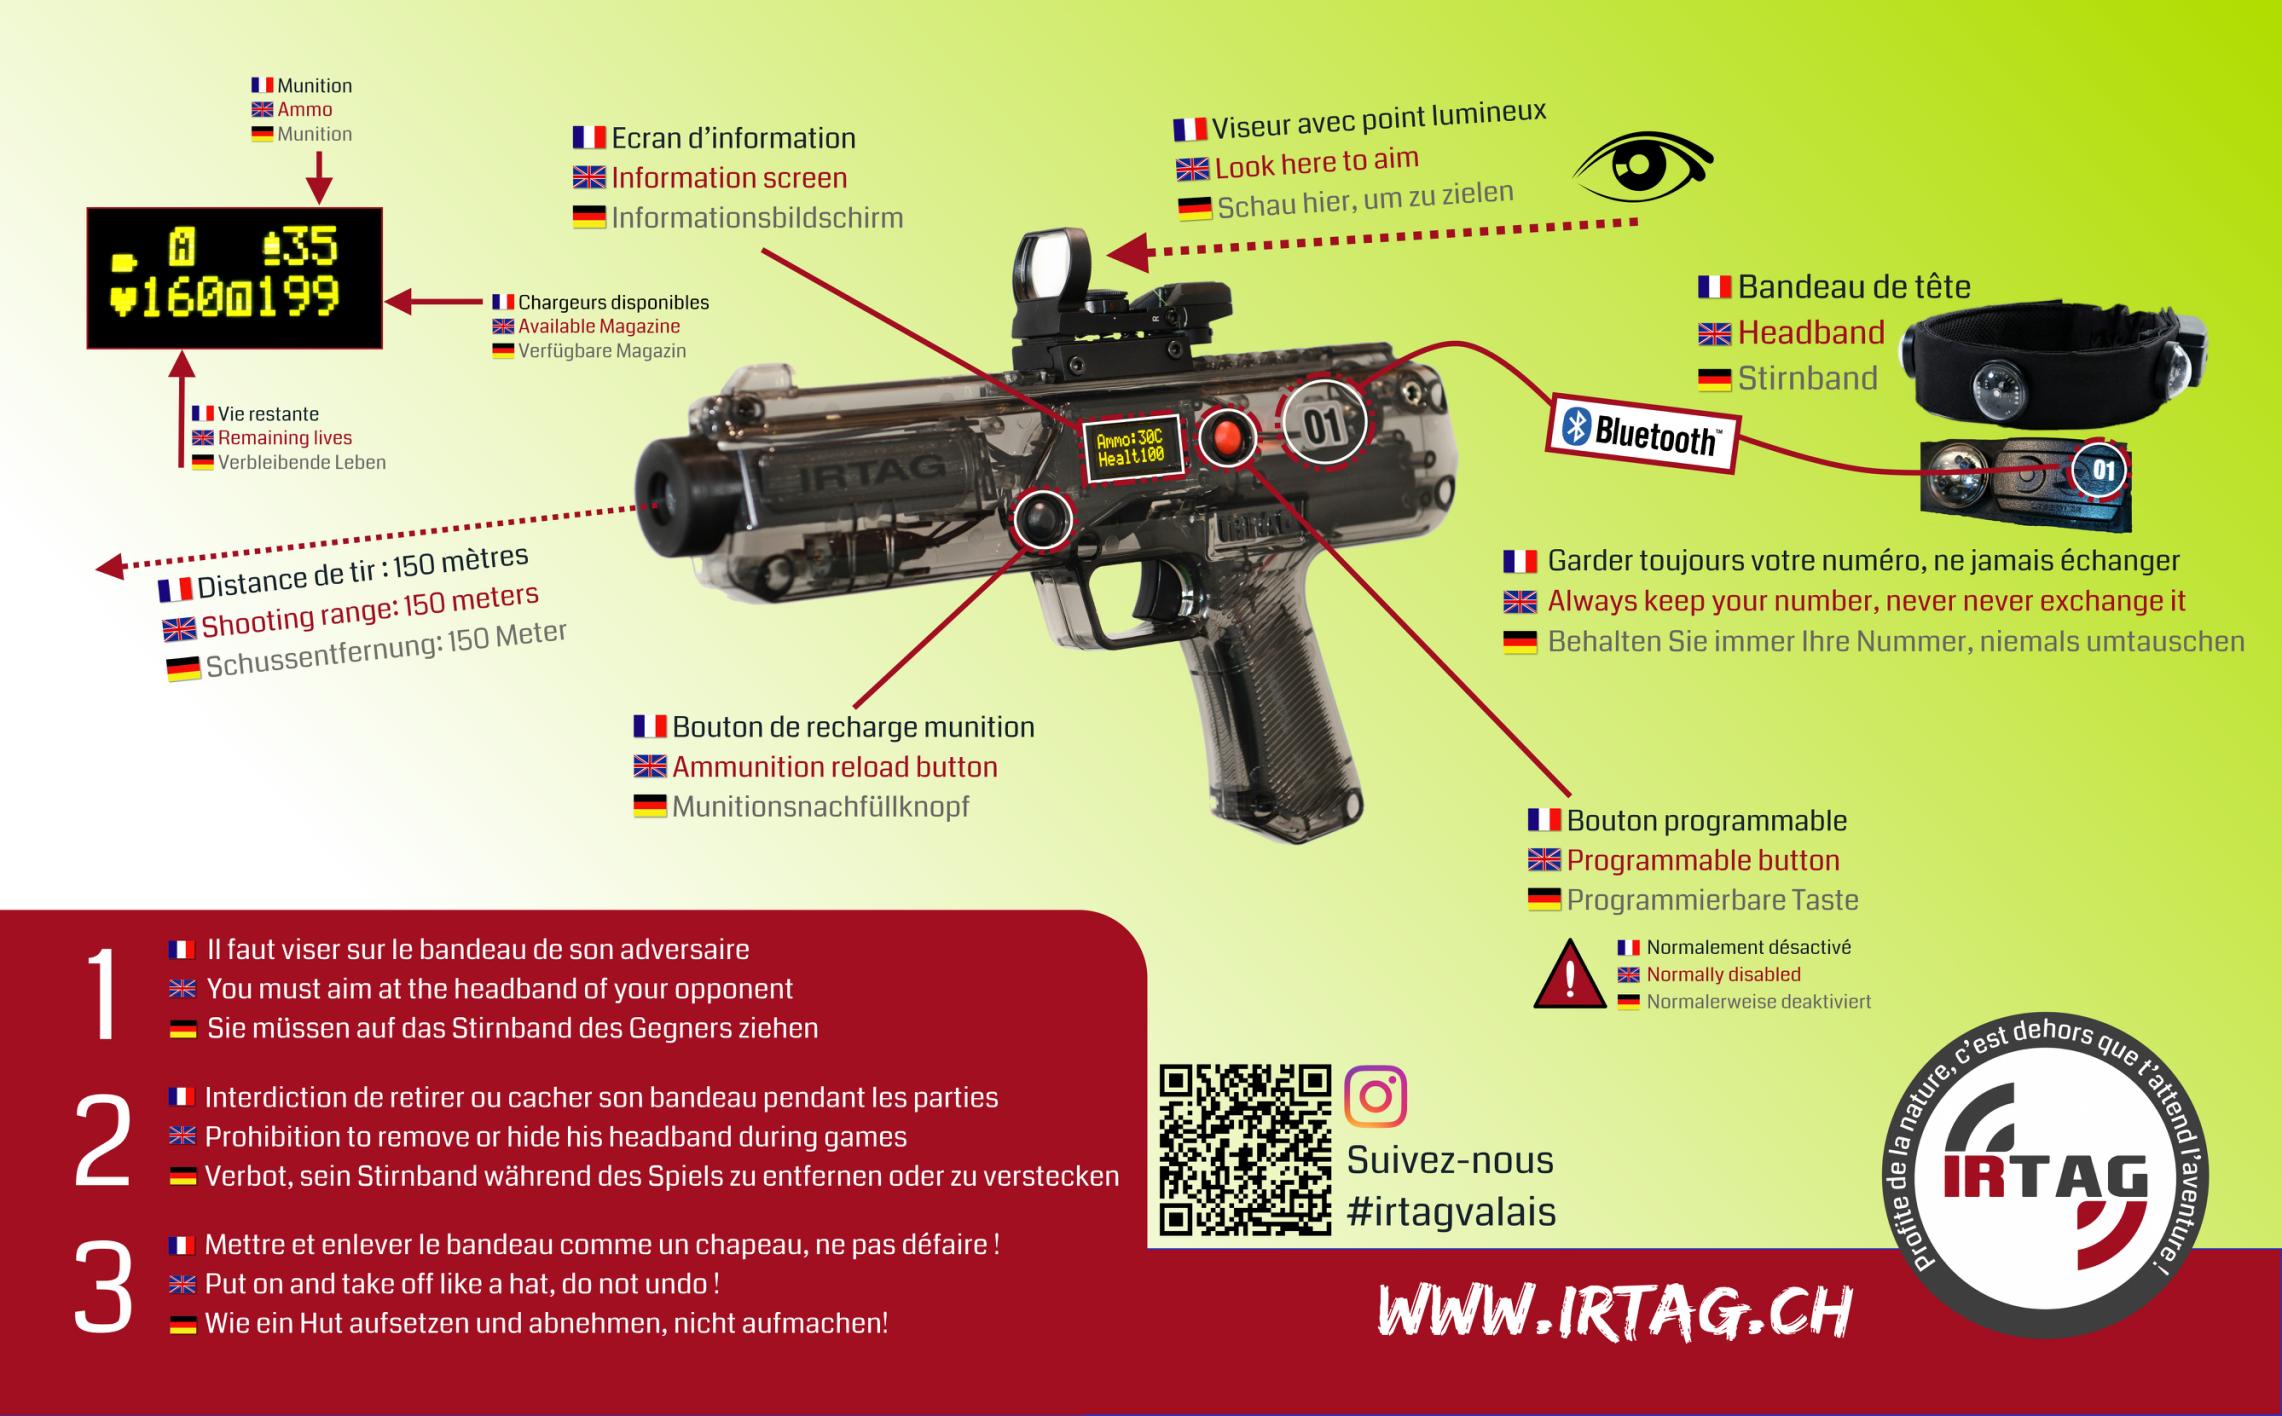 Explanation of laser tag